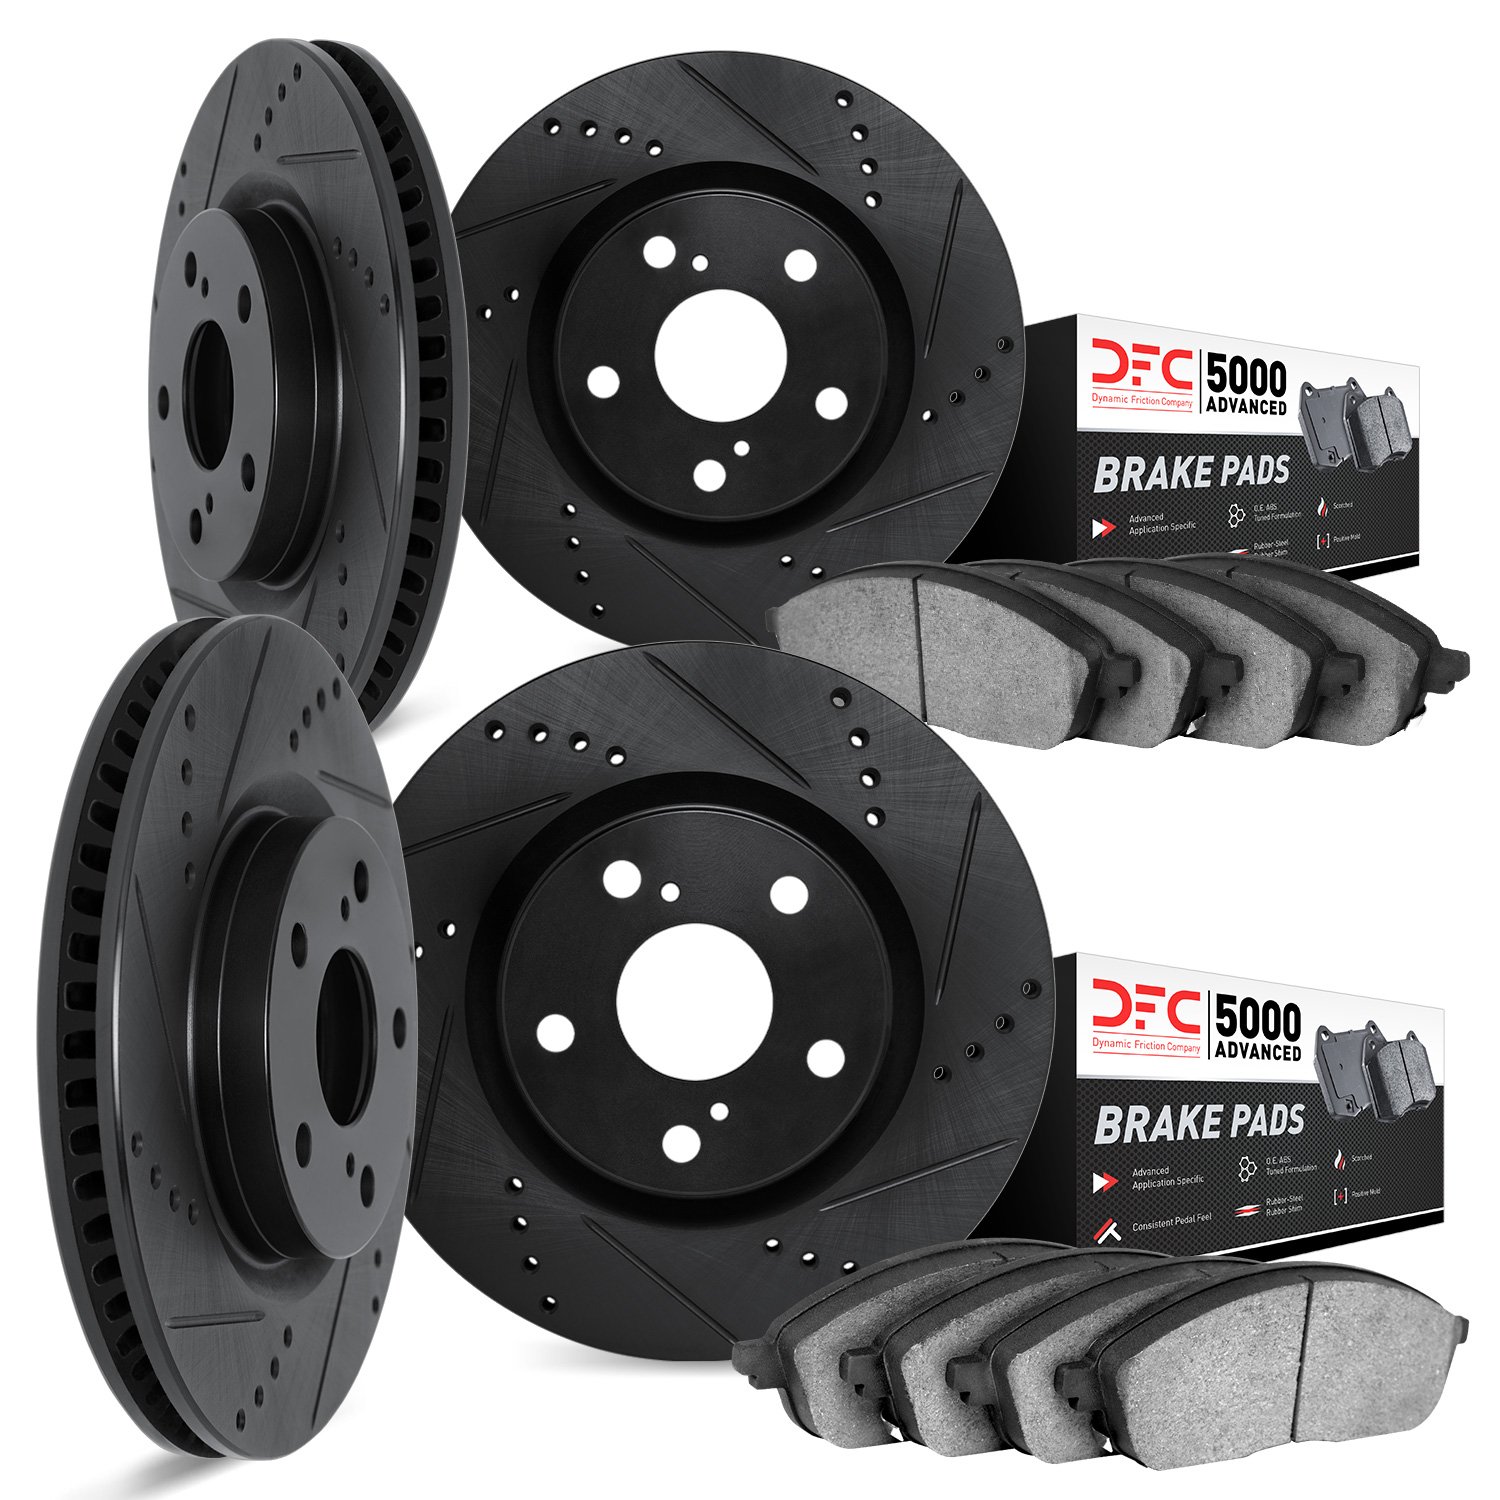 8504-31031 Drilled/Slotted Brake Rotors w/5000 Advanced Brake Pads Kit [Black], 2011-2013 BMW, Position: Front and Rear